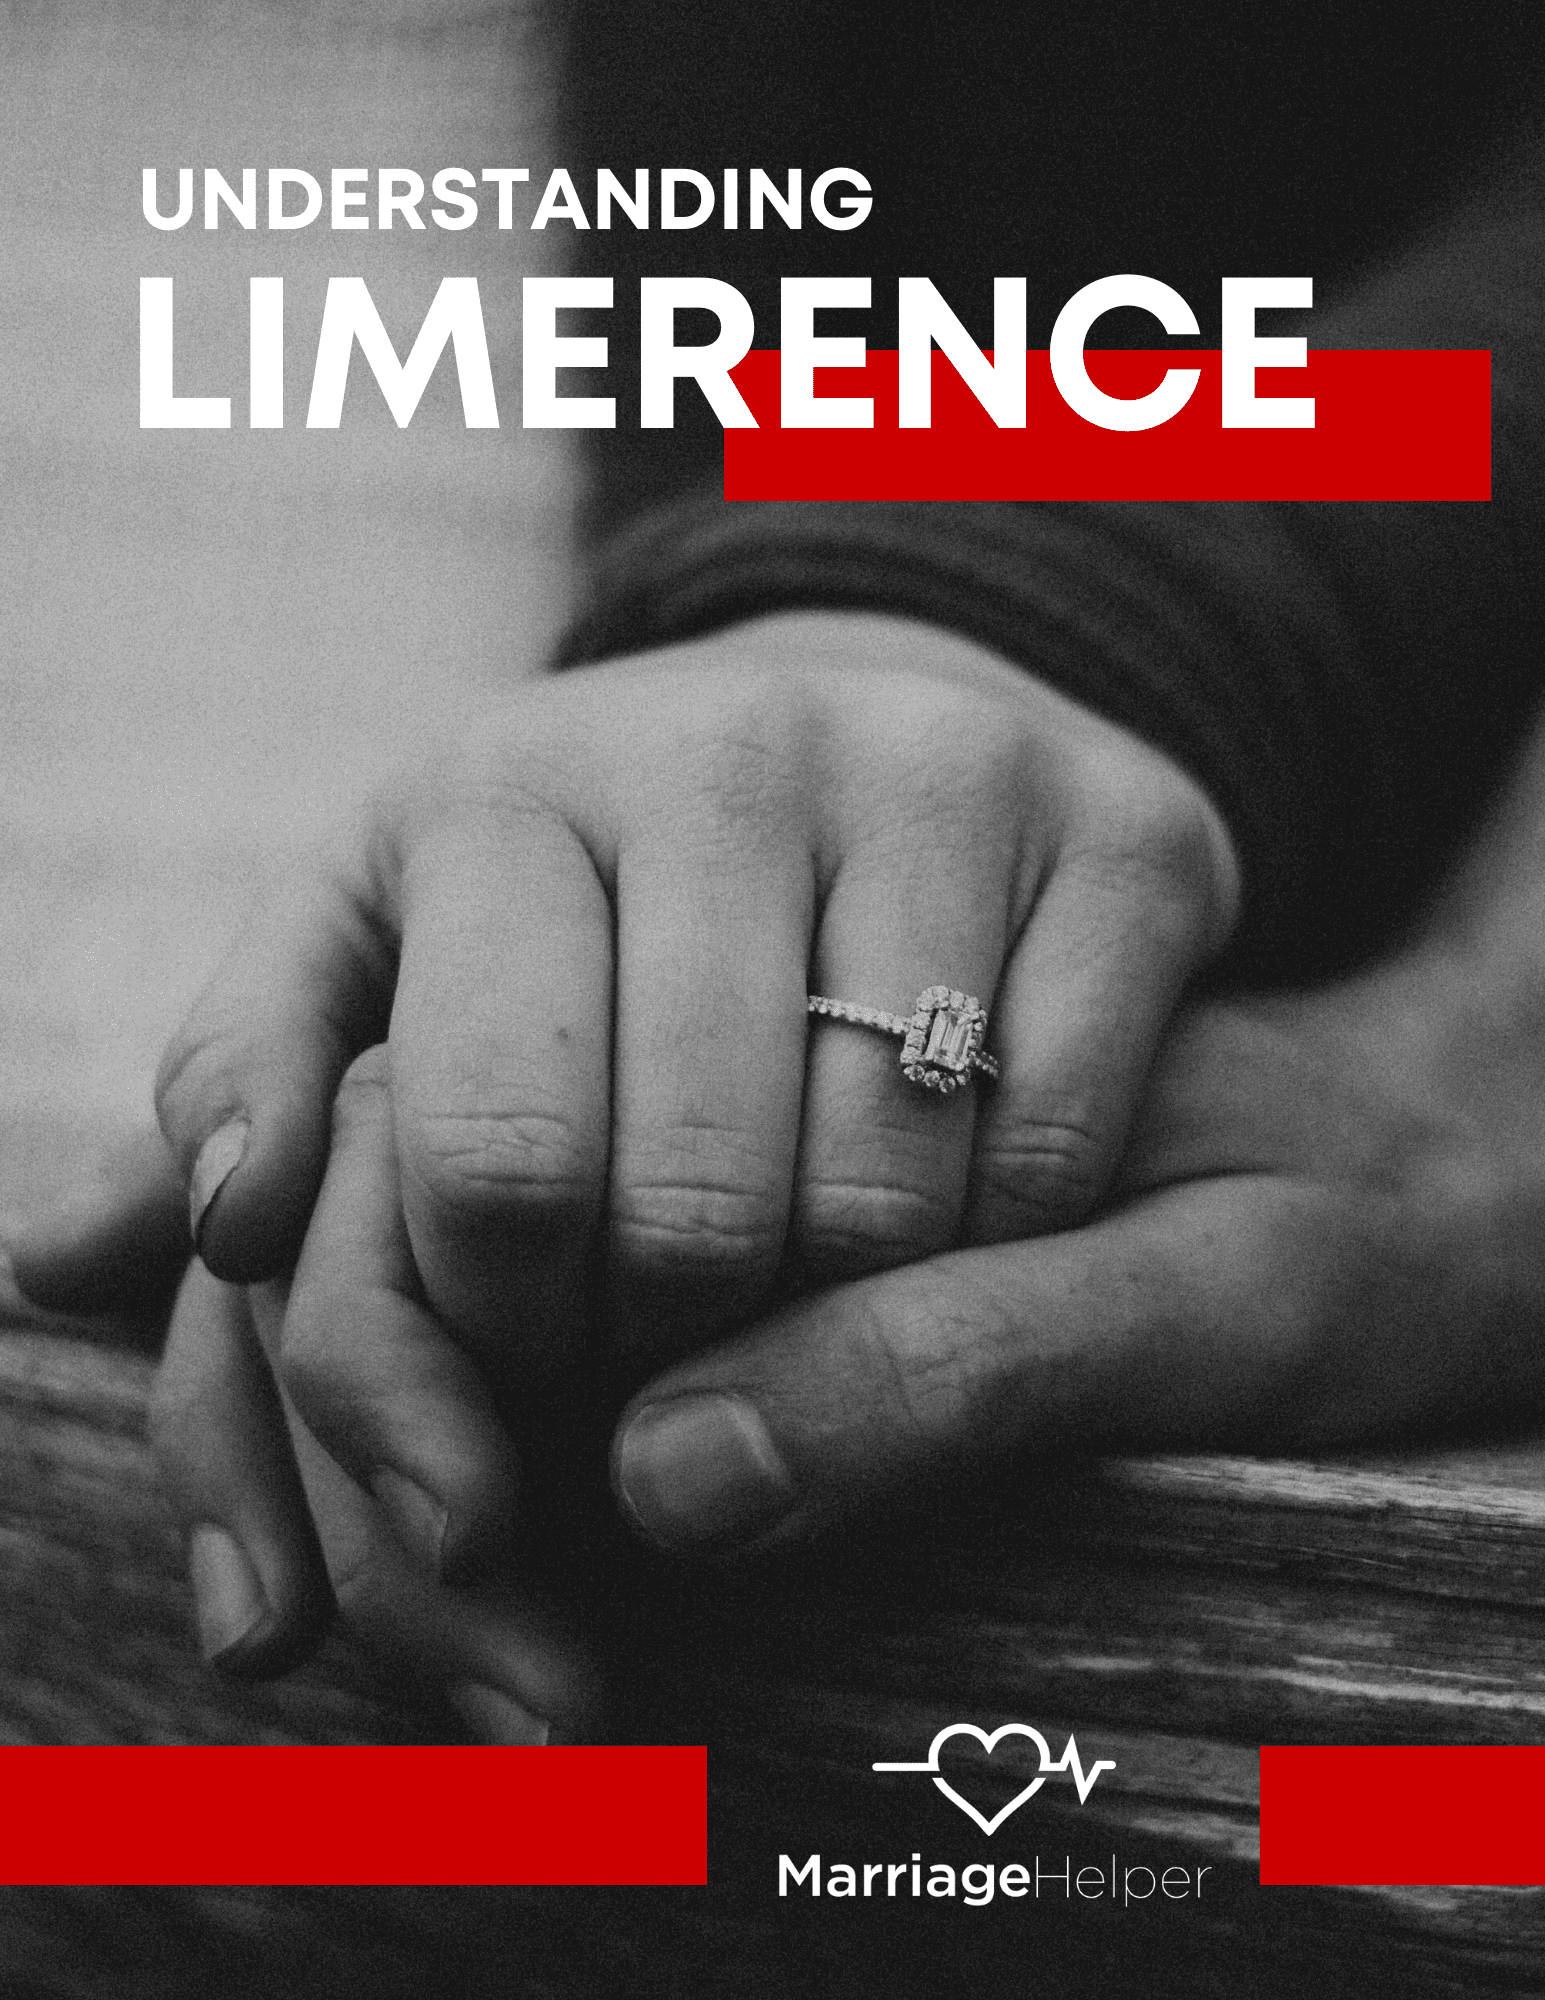 marriage_helper_limerence_ebook_cover